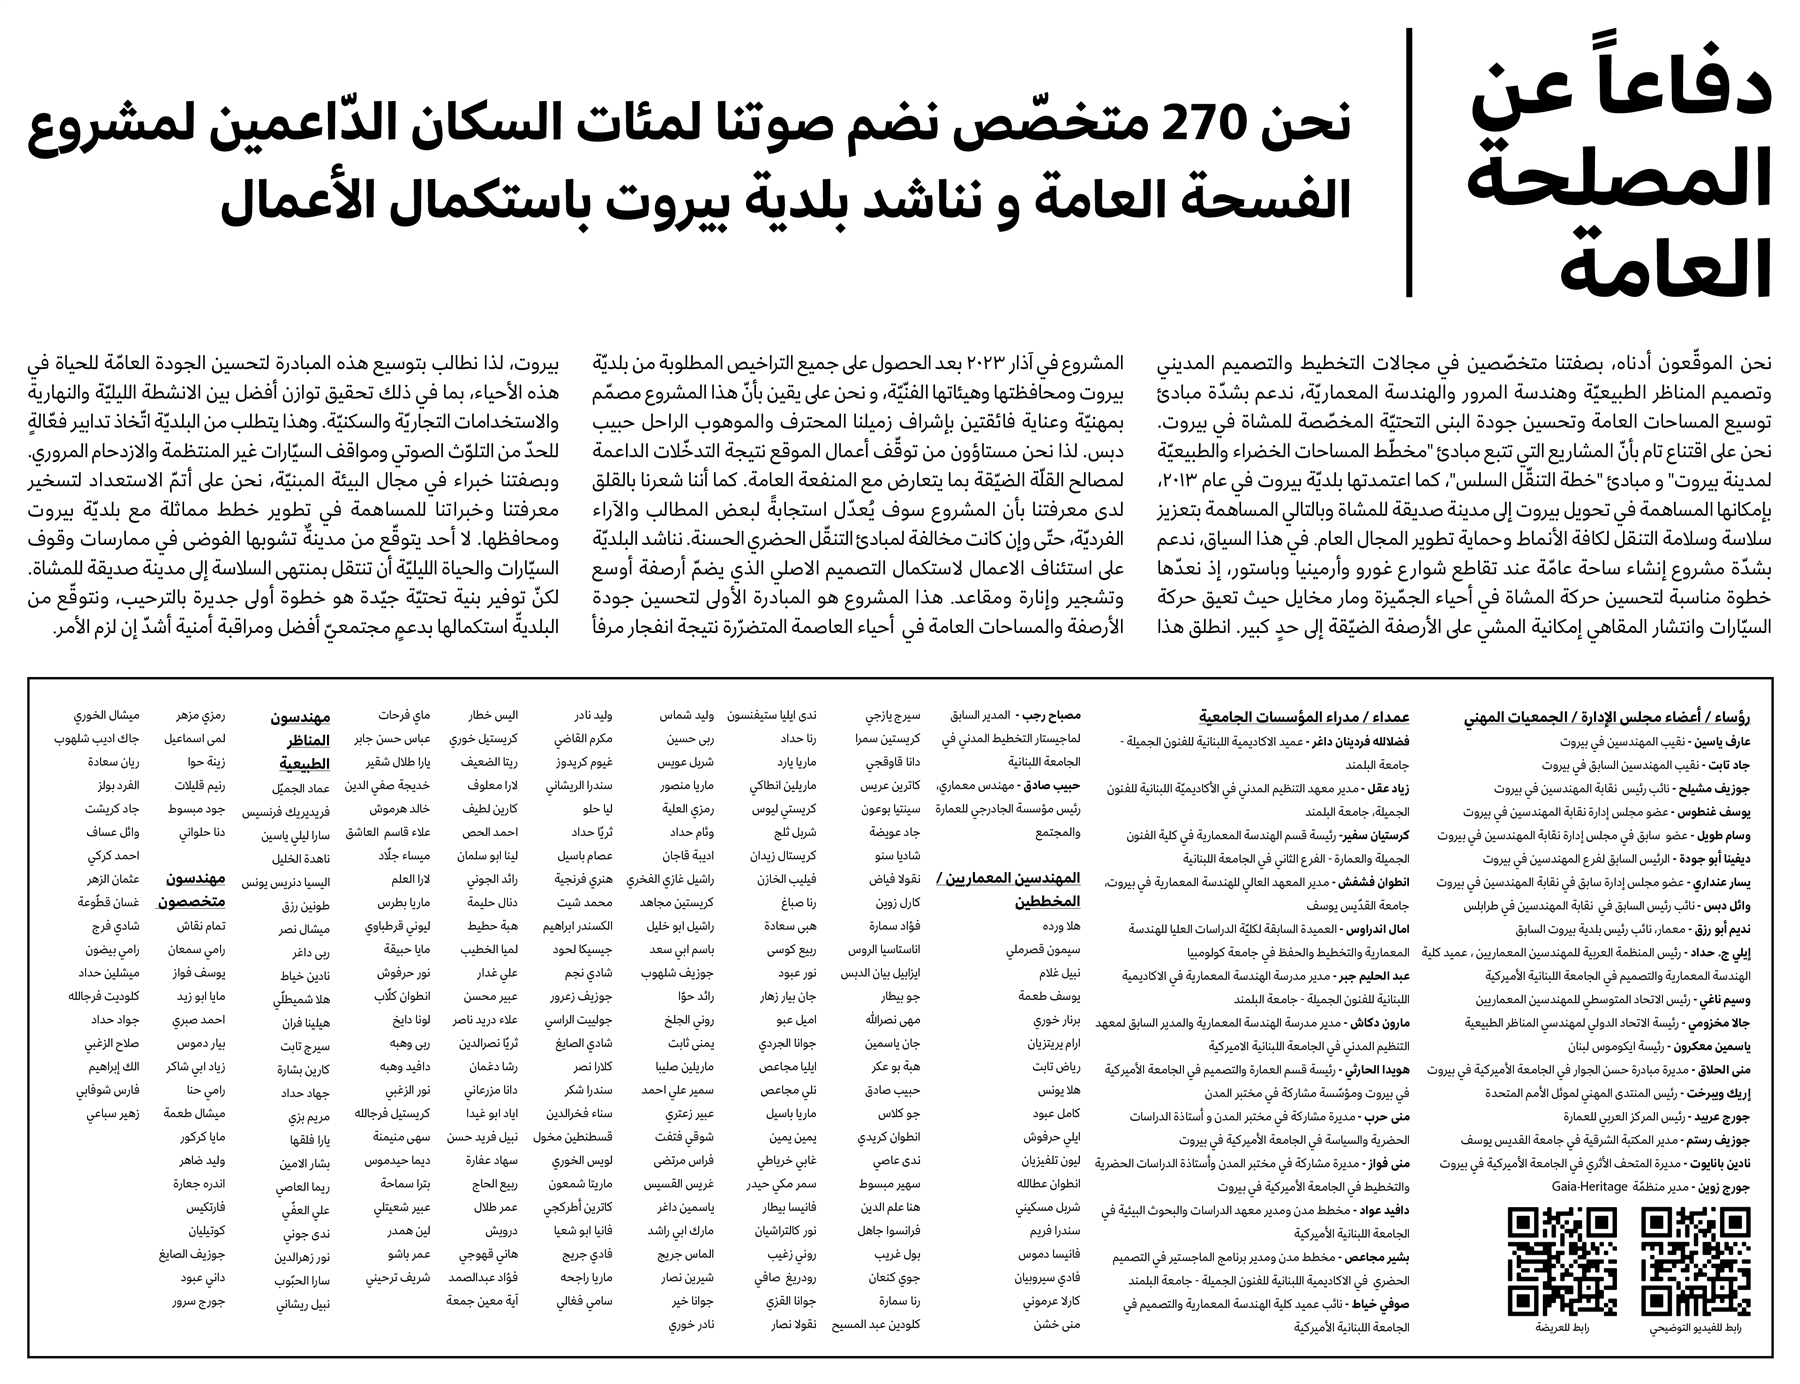 The petition as it appeared in An-Nahar newspaper on Monday July 17, 2023